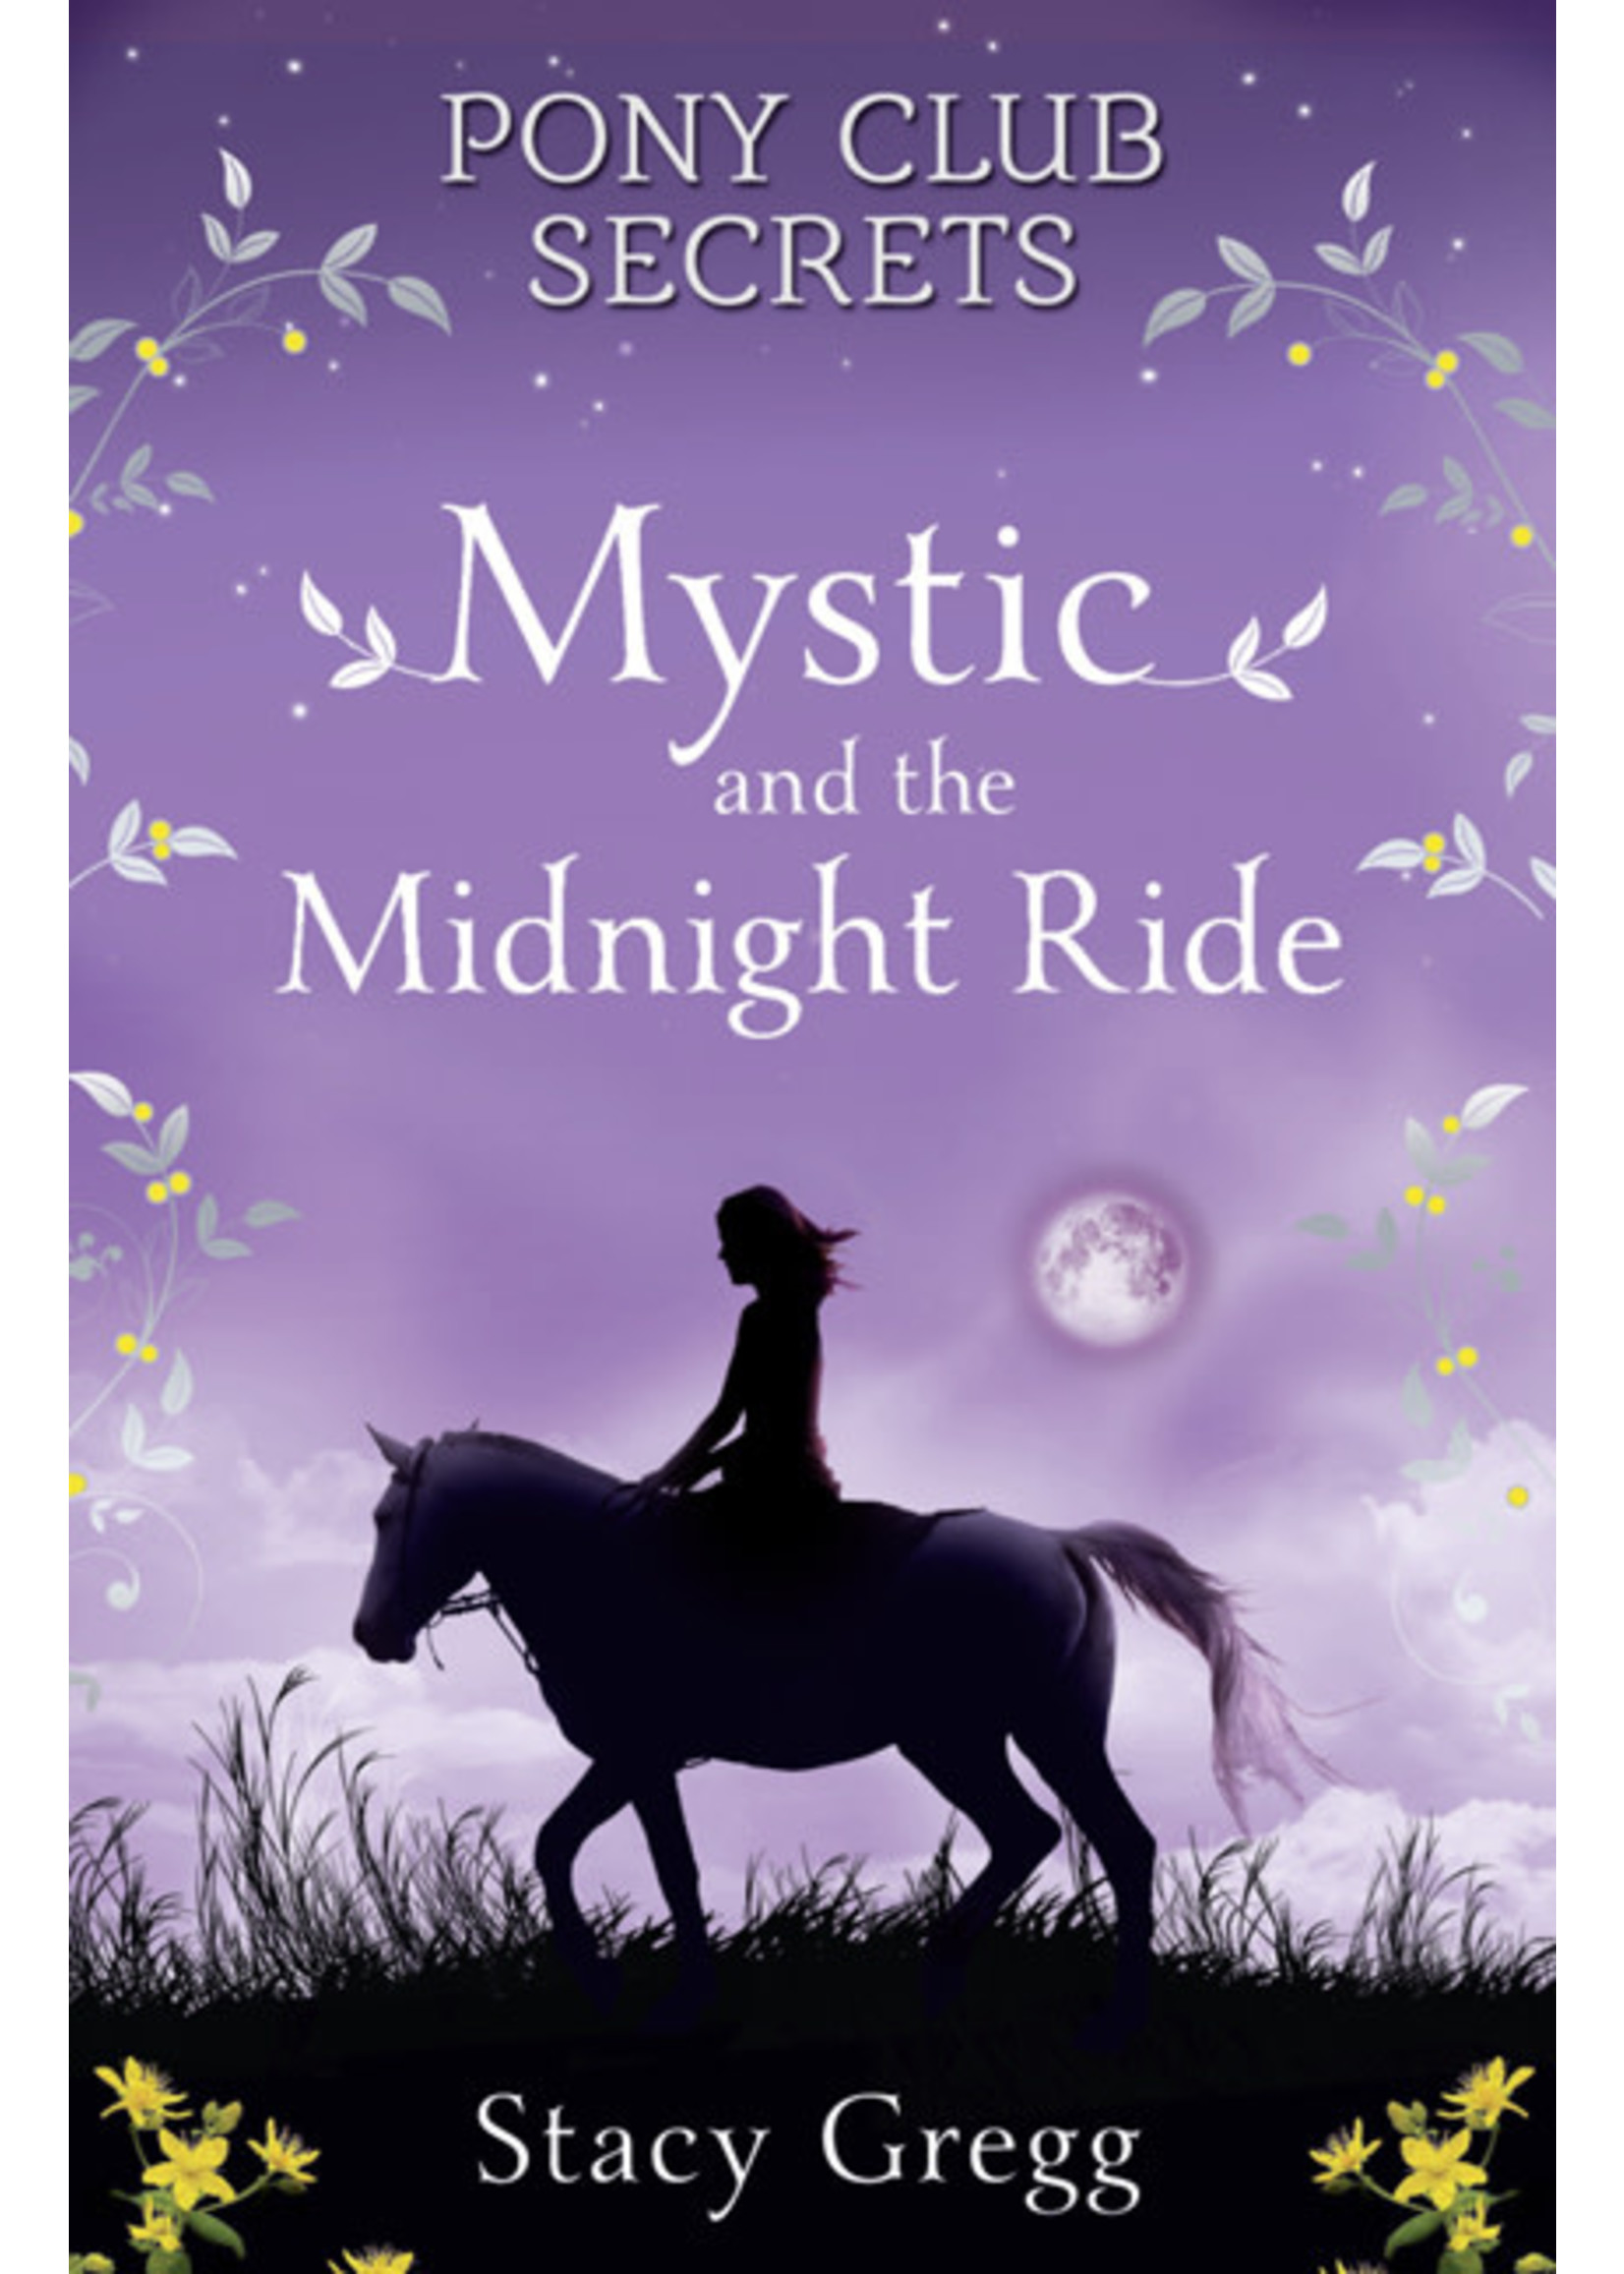 Mystic and the Midnight Ride (Pony Club Secrets #1) by Stacy Gregg